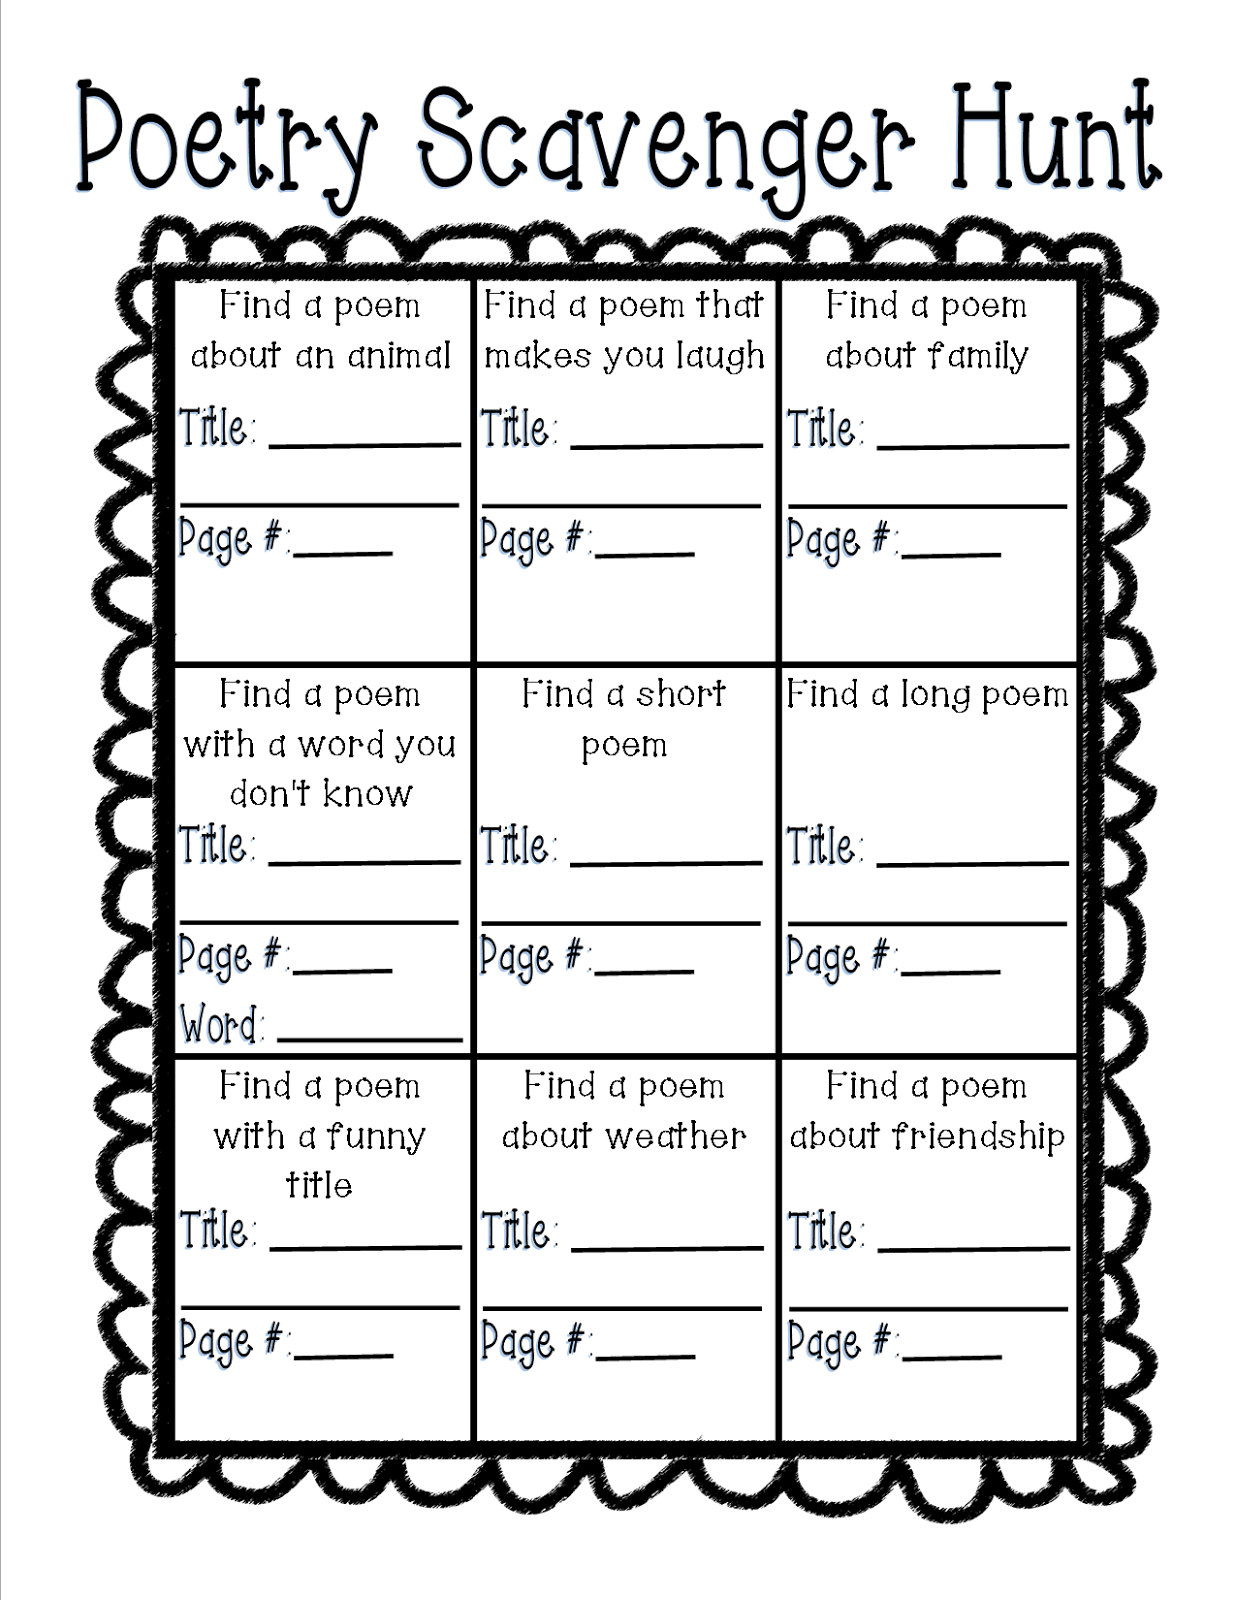 Free Printable Poetry Worksheets For Middle School